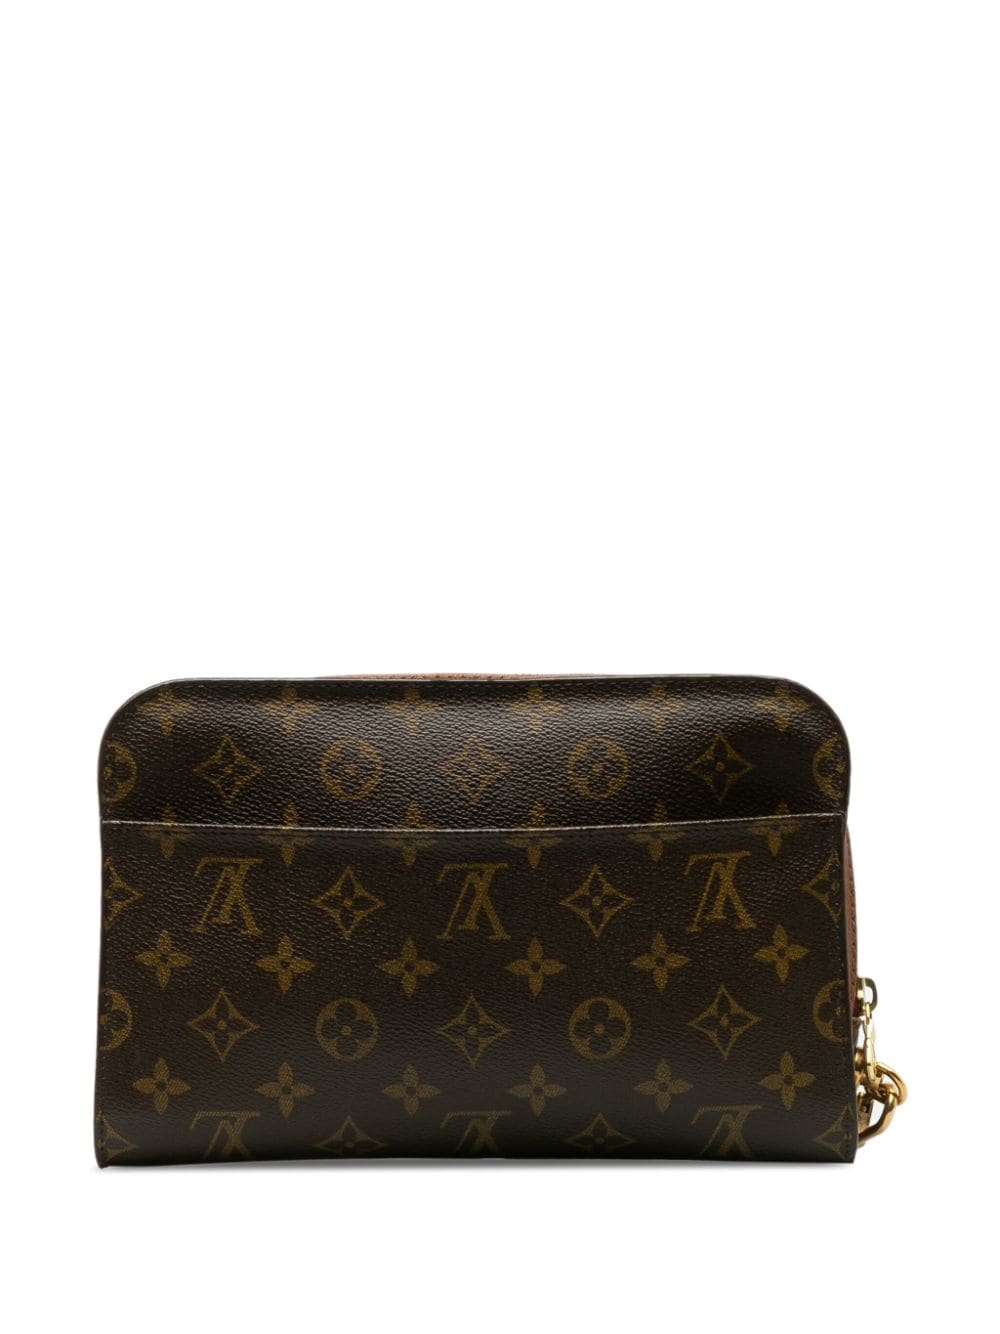 Louis Vuitton Pre-Owned 2004 Orsay clutch bag - Bruin